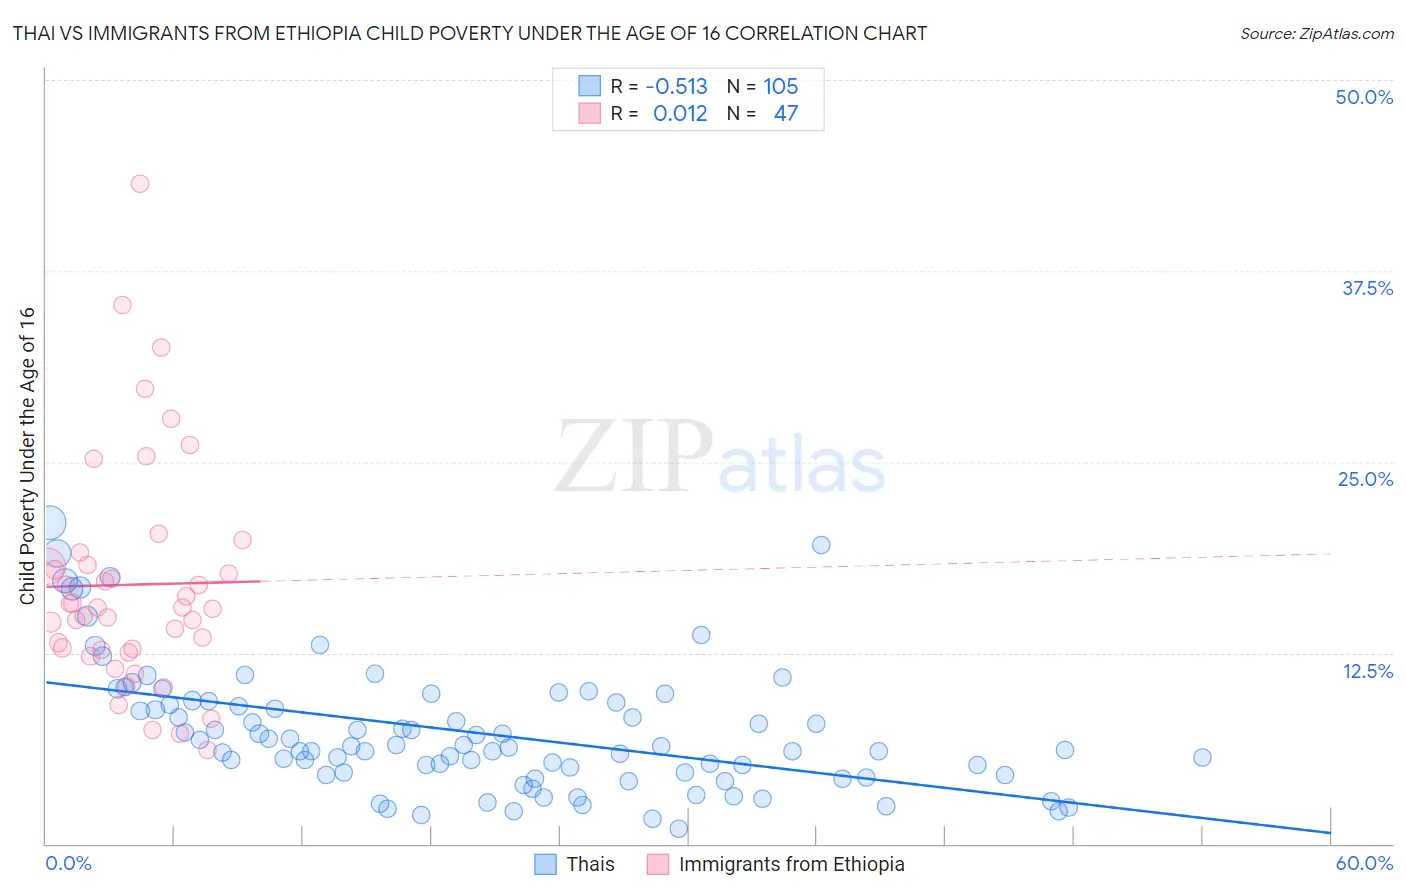 Thai vs Immigrants from Ethiopia Child Poverty Under the Age of 16